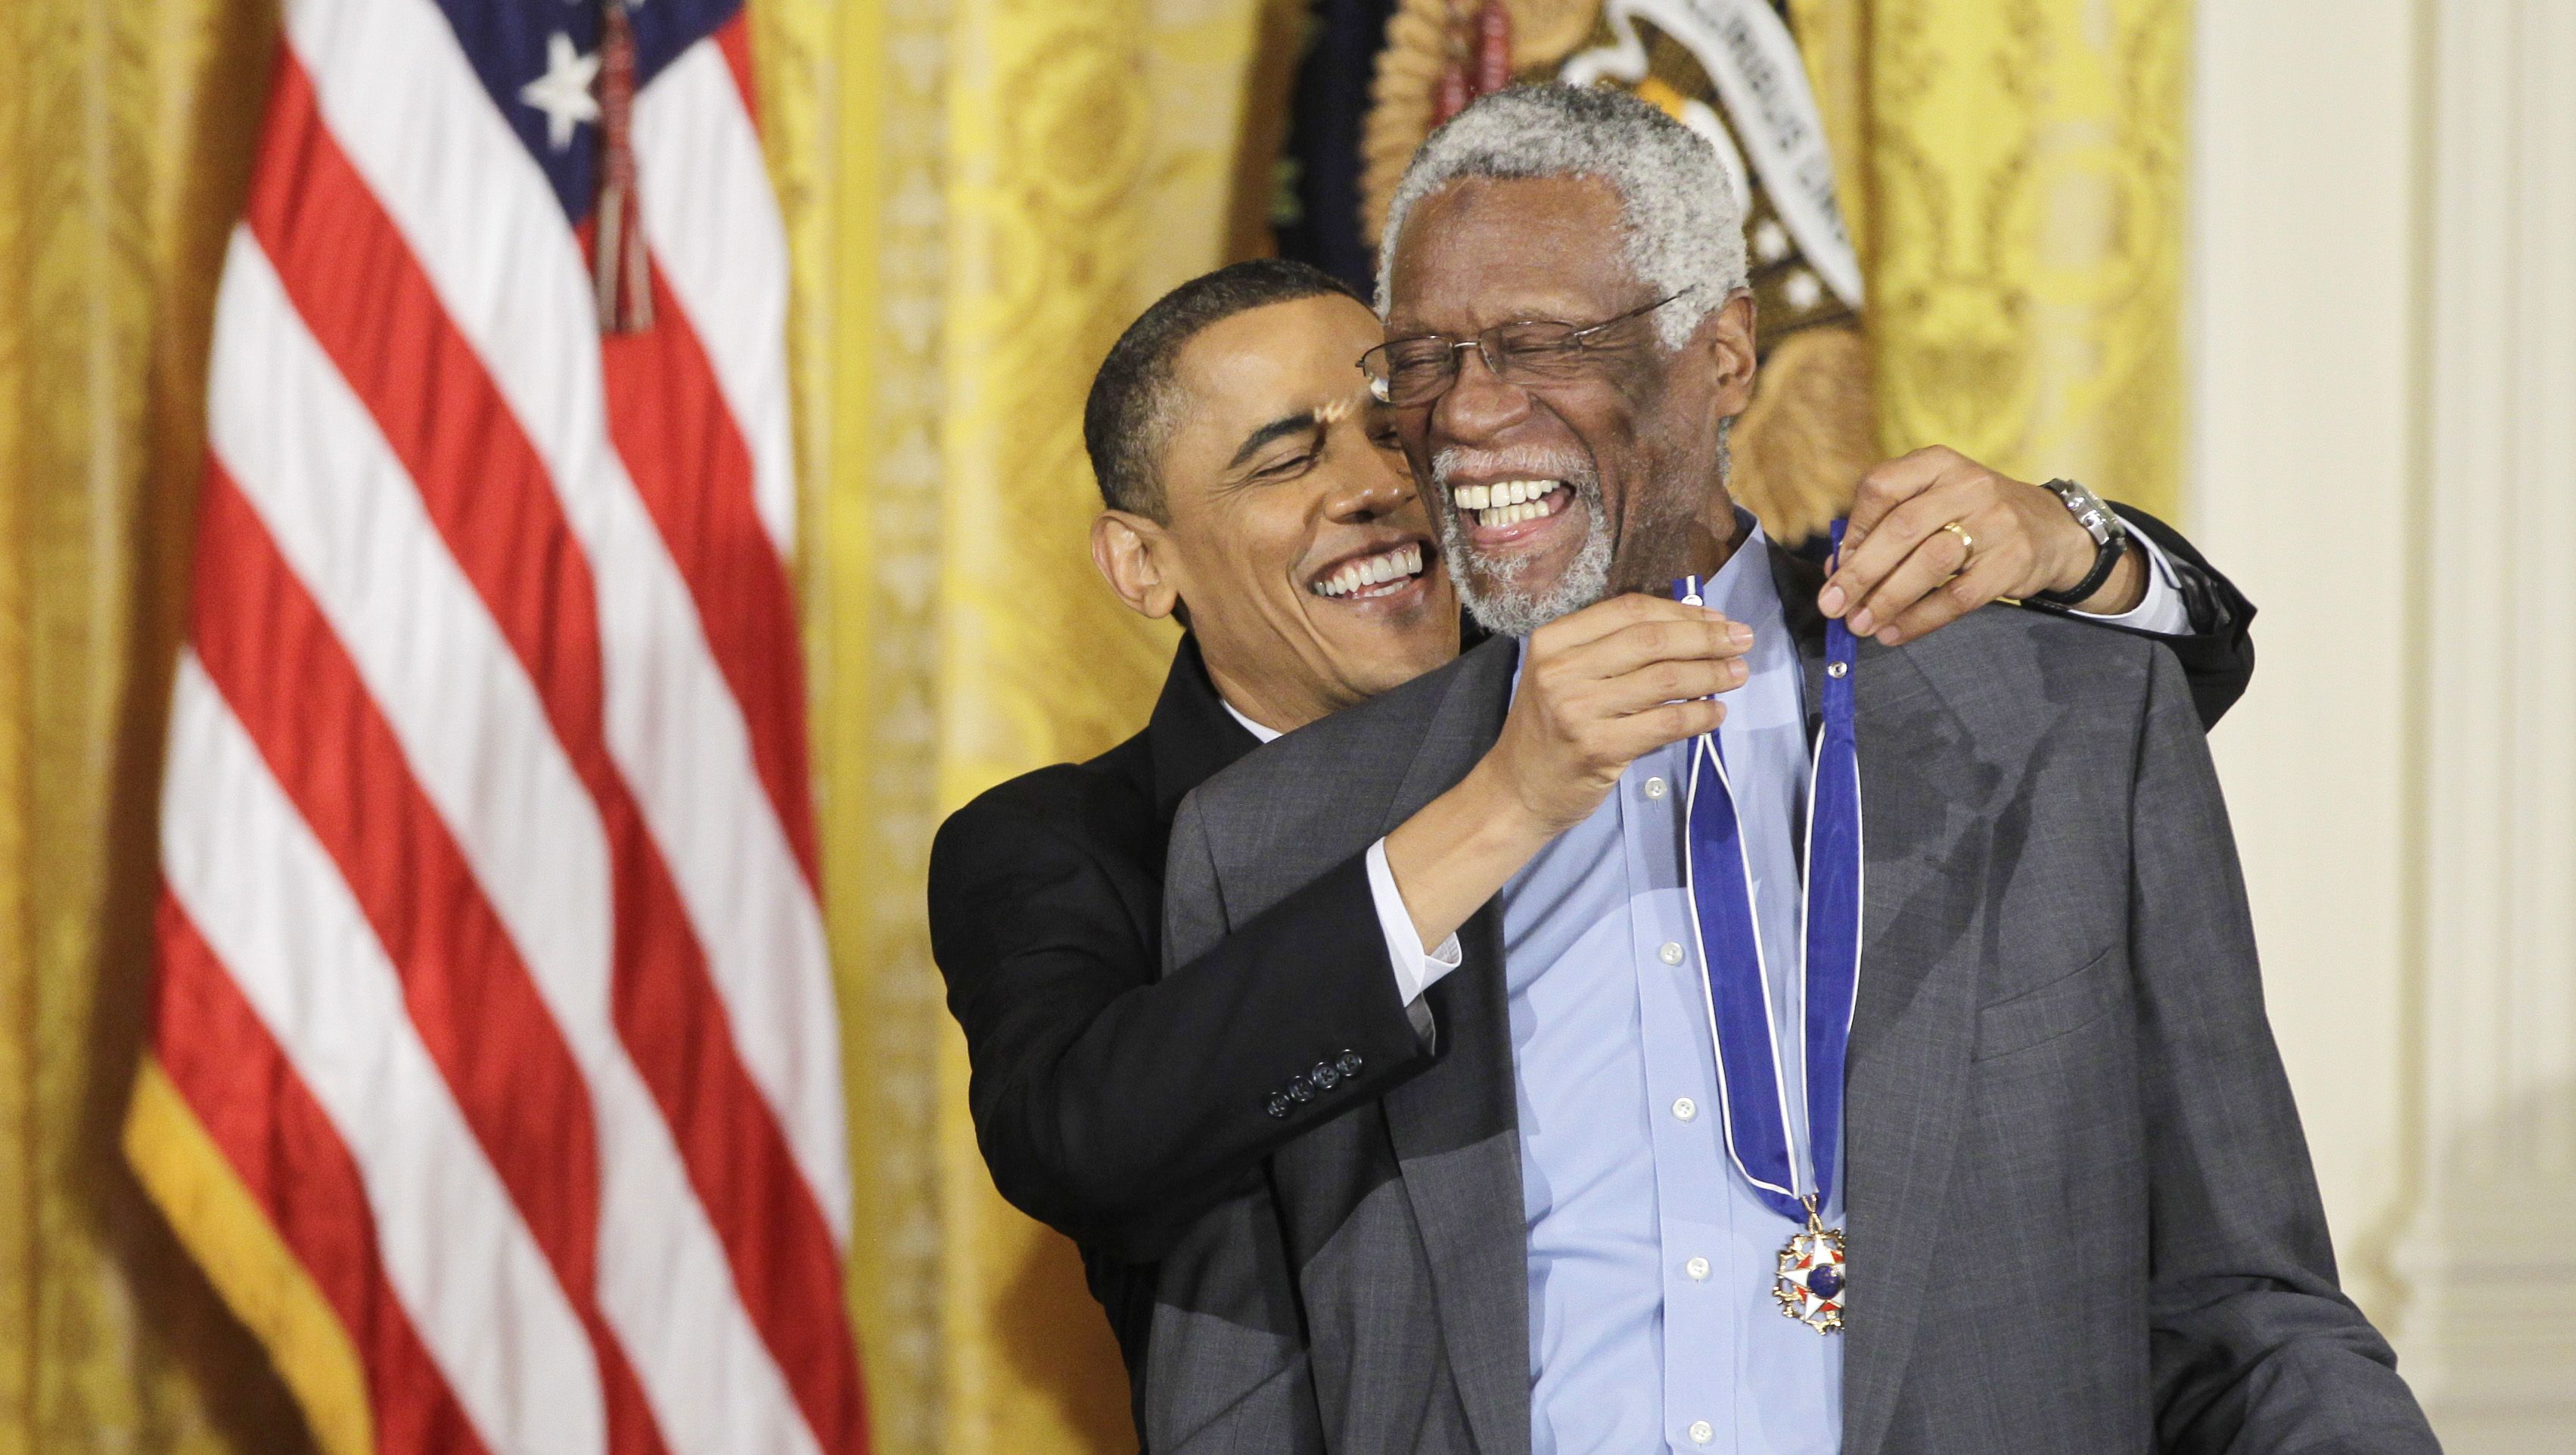 NBA unveils No. 6 patch to honor Bill Russell across league